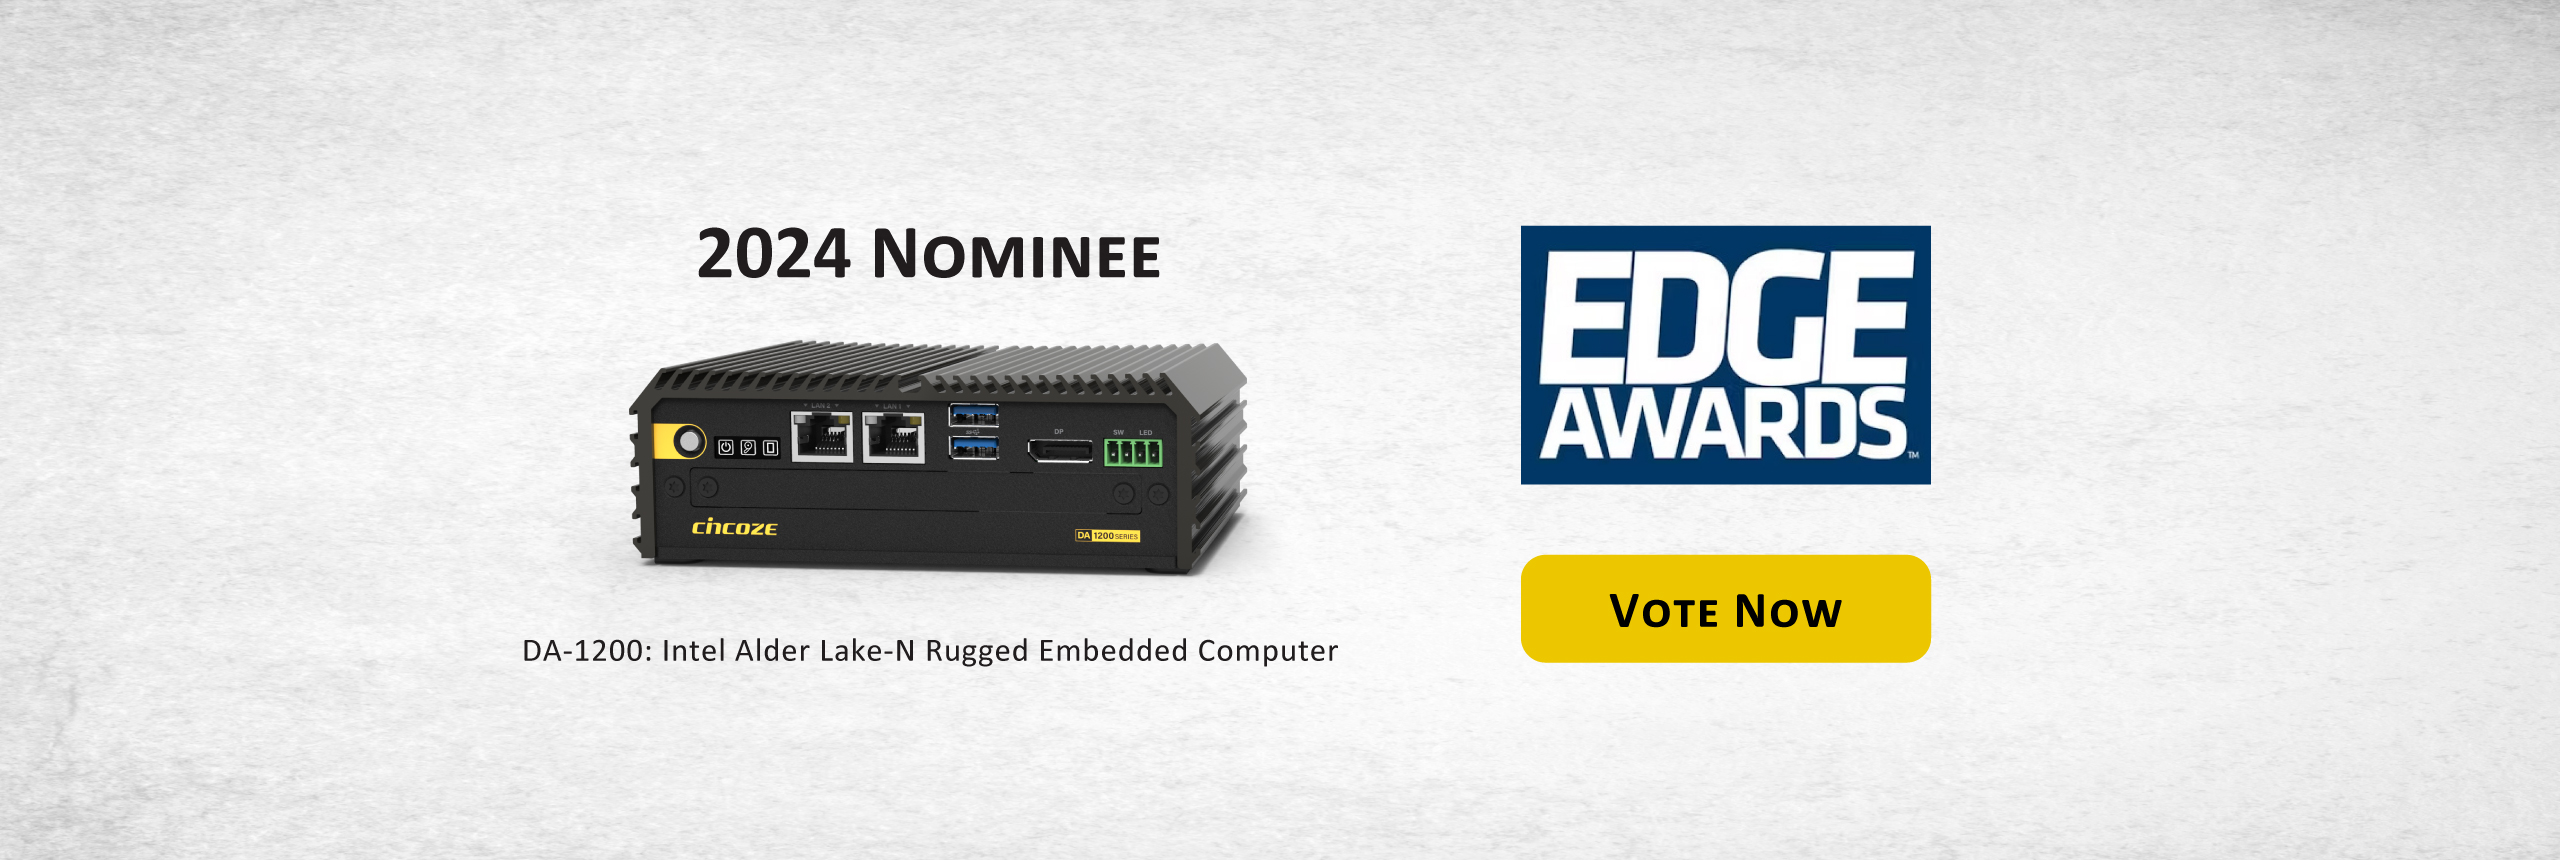 Cast Your Vote: Cincoze Rugged Embedded Computer in the 2024 EDGE Awards!